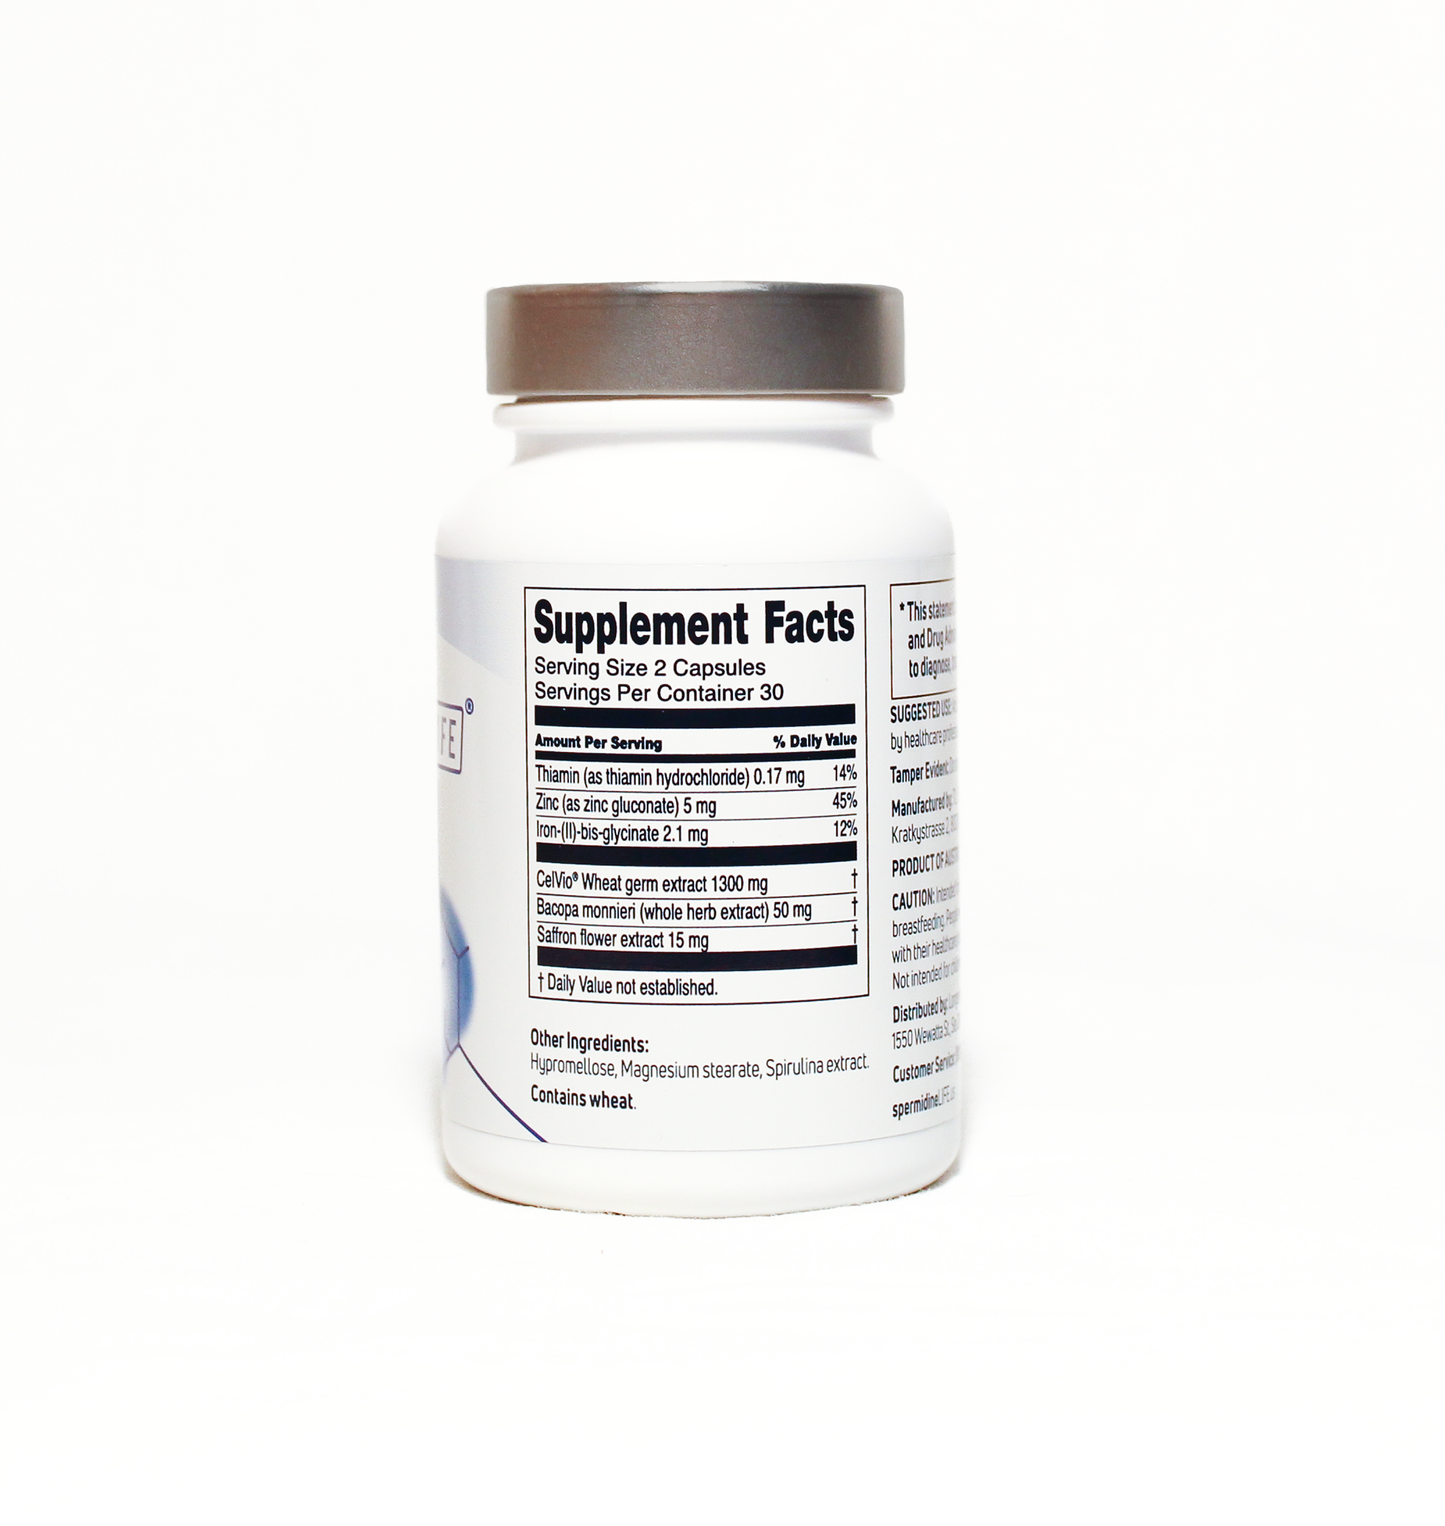 A bottle of spermidineLIFE® Memory+ 1300mg Dietary Supplement by spermidineLIFE® on a white background.